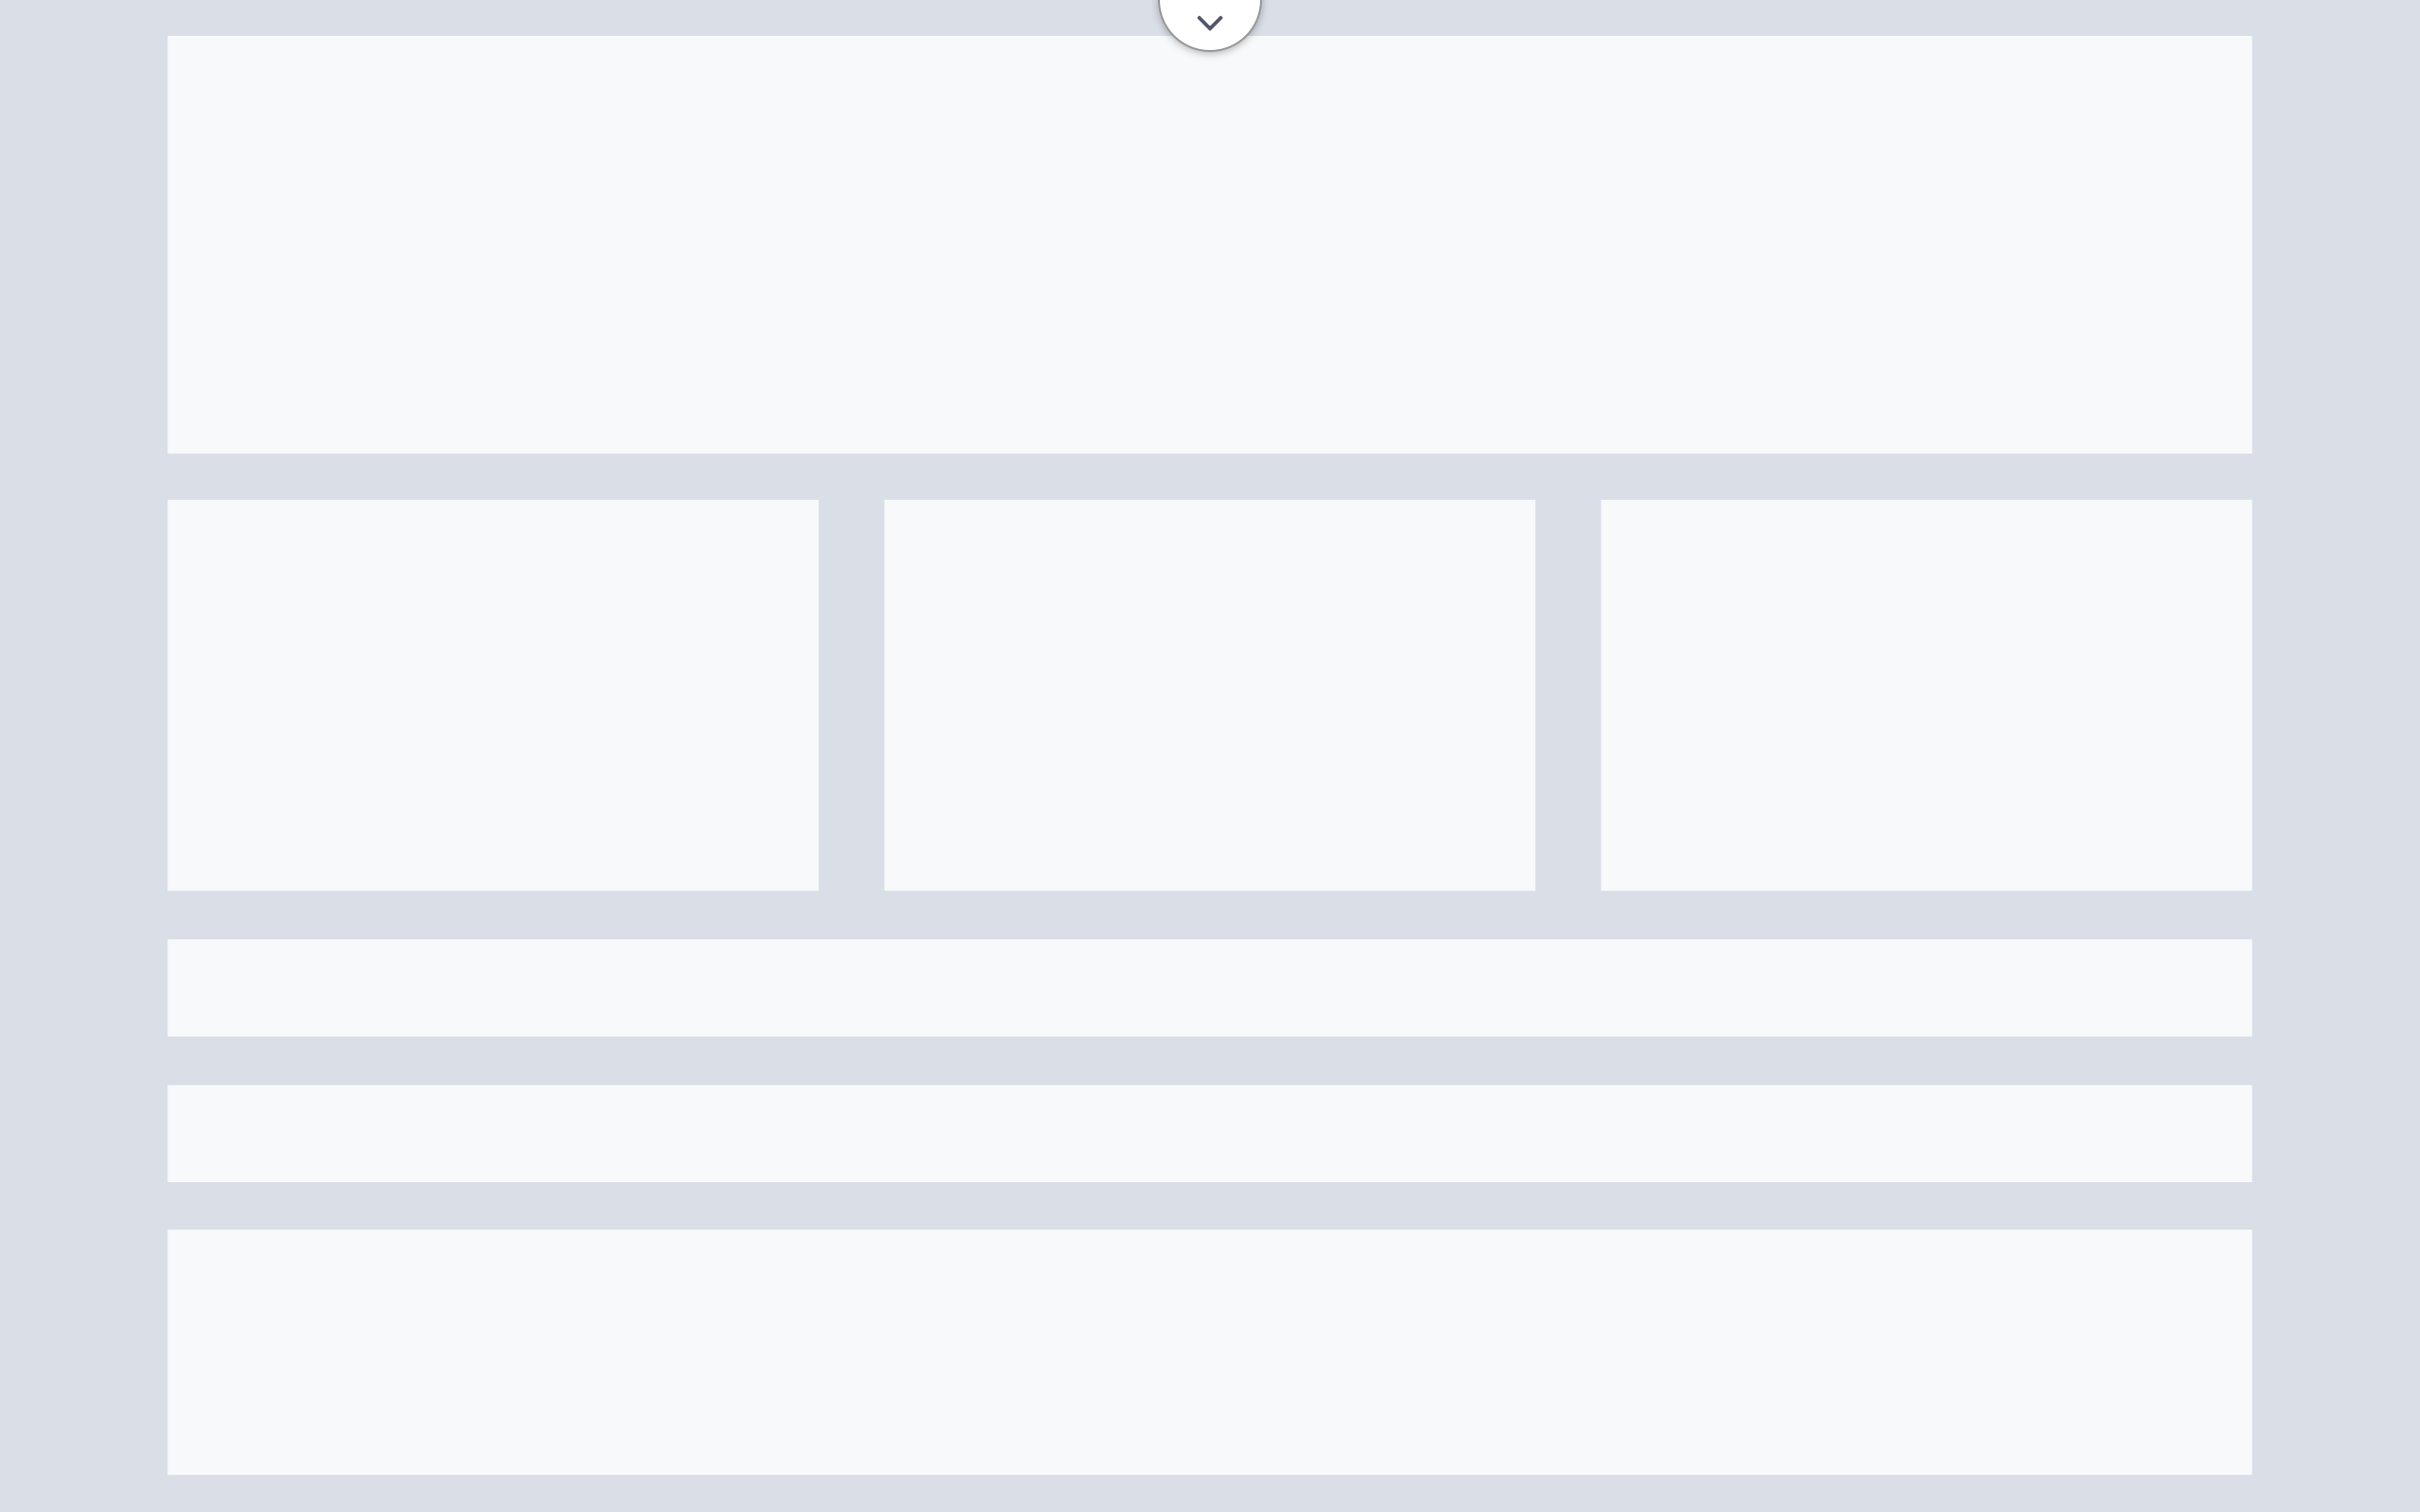 A wireframe showing a full-screen canvas; click button to show header and panels